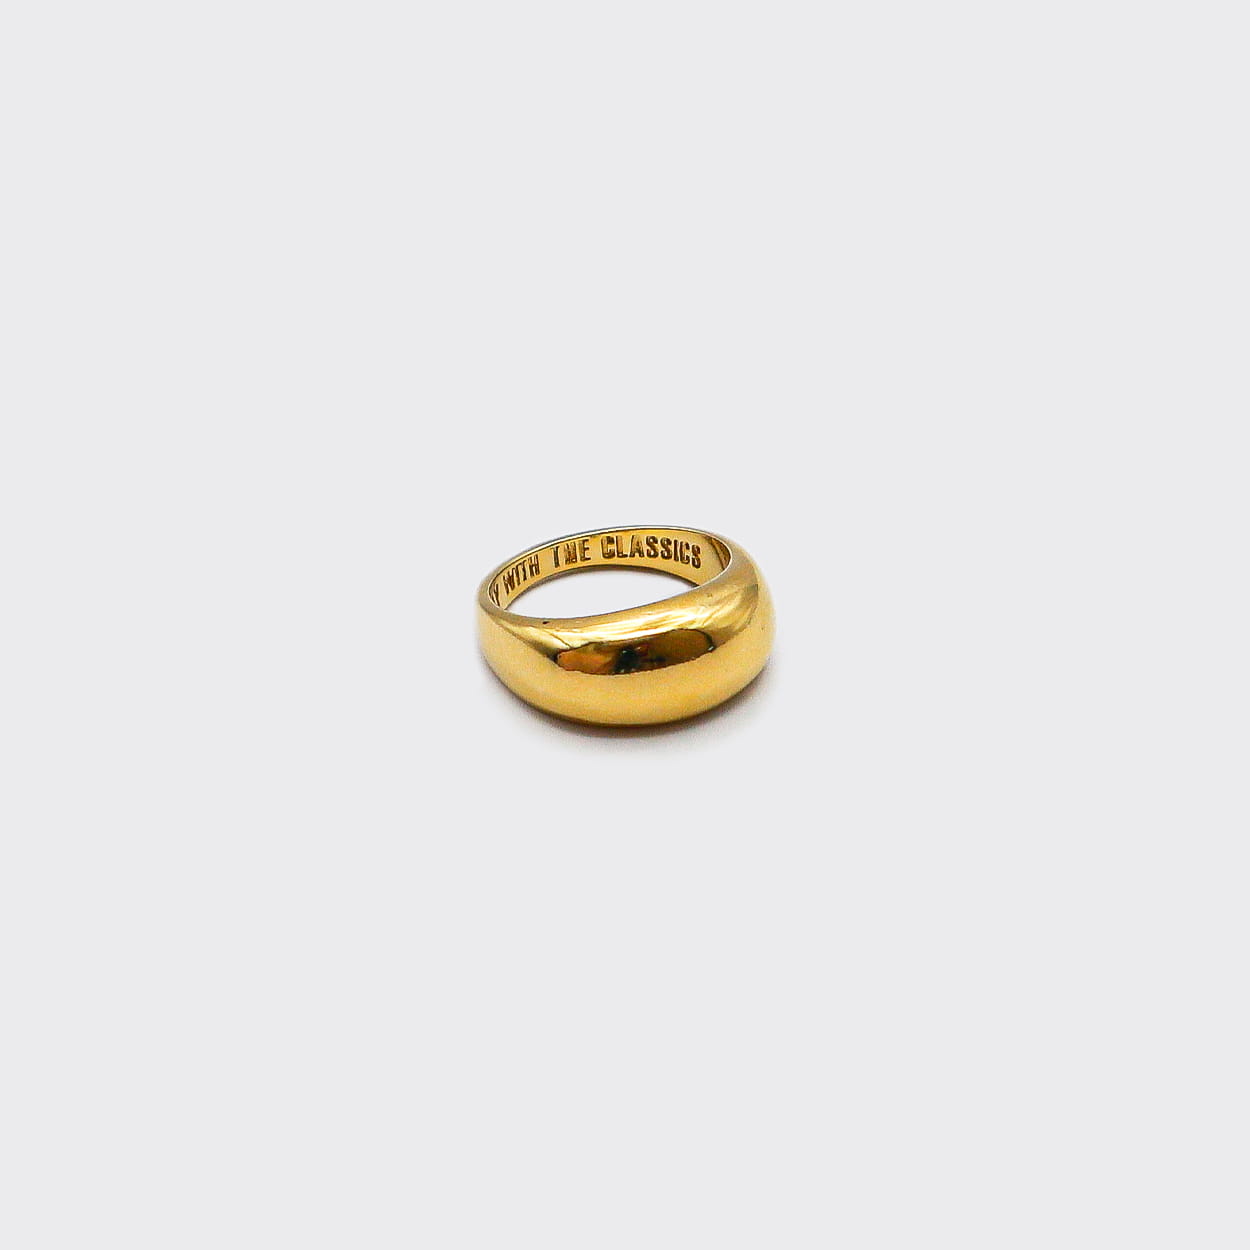 Atelier Domingo's Classic gold ring is made in Spain. This unisex ring is for both men and women. This jewelry is made of a high-quality 24 karat gold plating. Stay with the Classics.